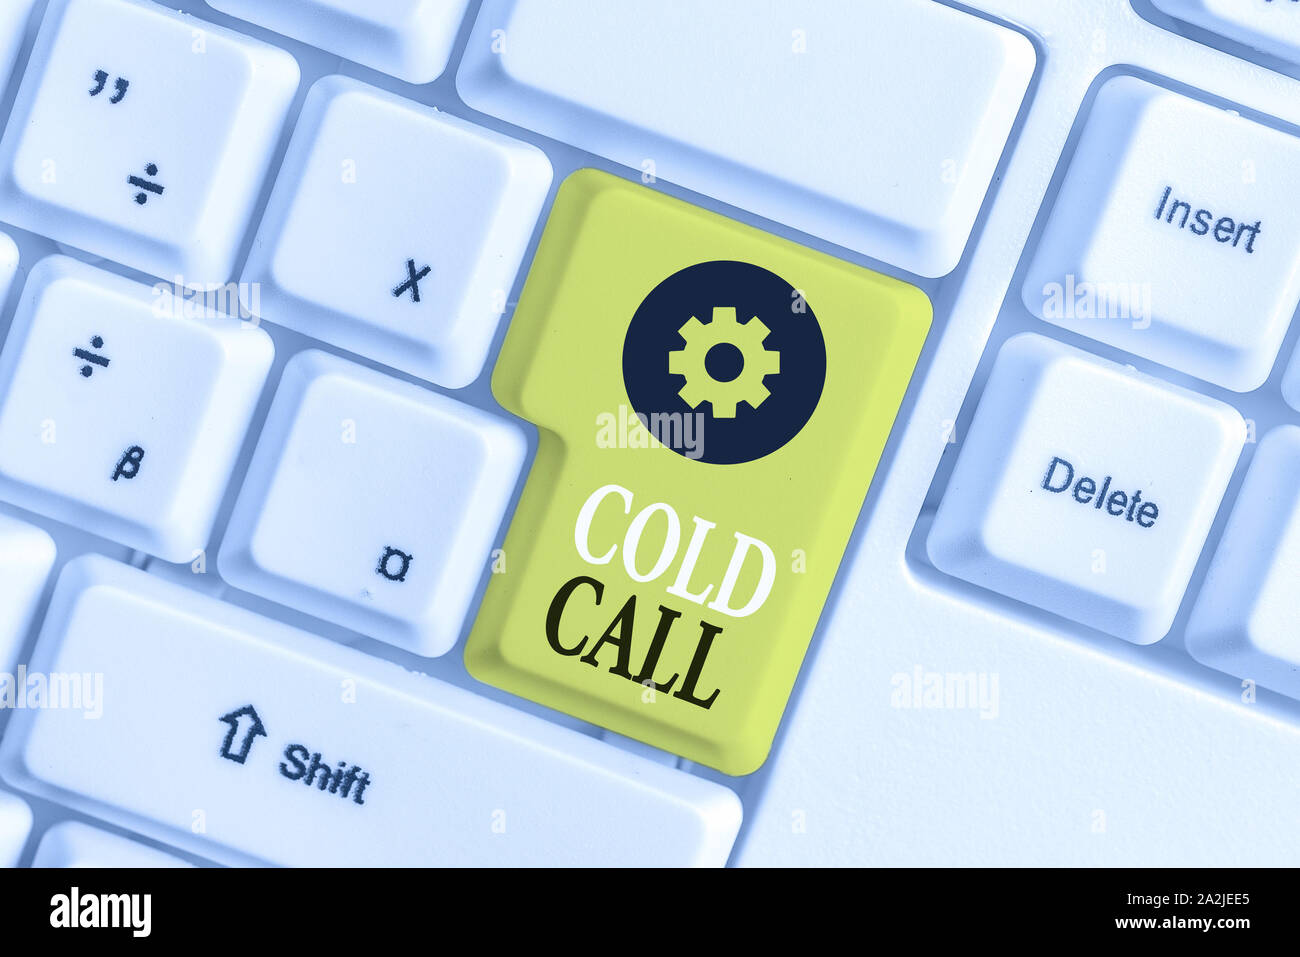 Conceptual hand writing showing Cold Call. Concept meaning Unsolicited call made by someone trying to sell goods or services White pc keyboard with no Stock Photo